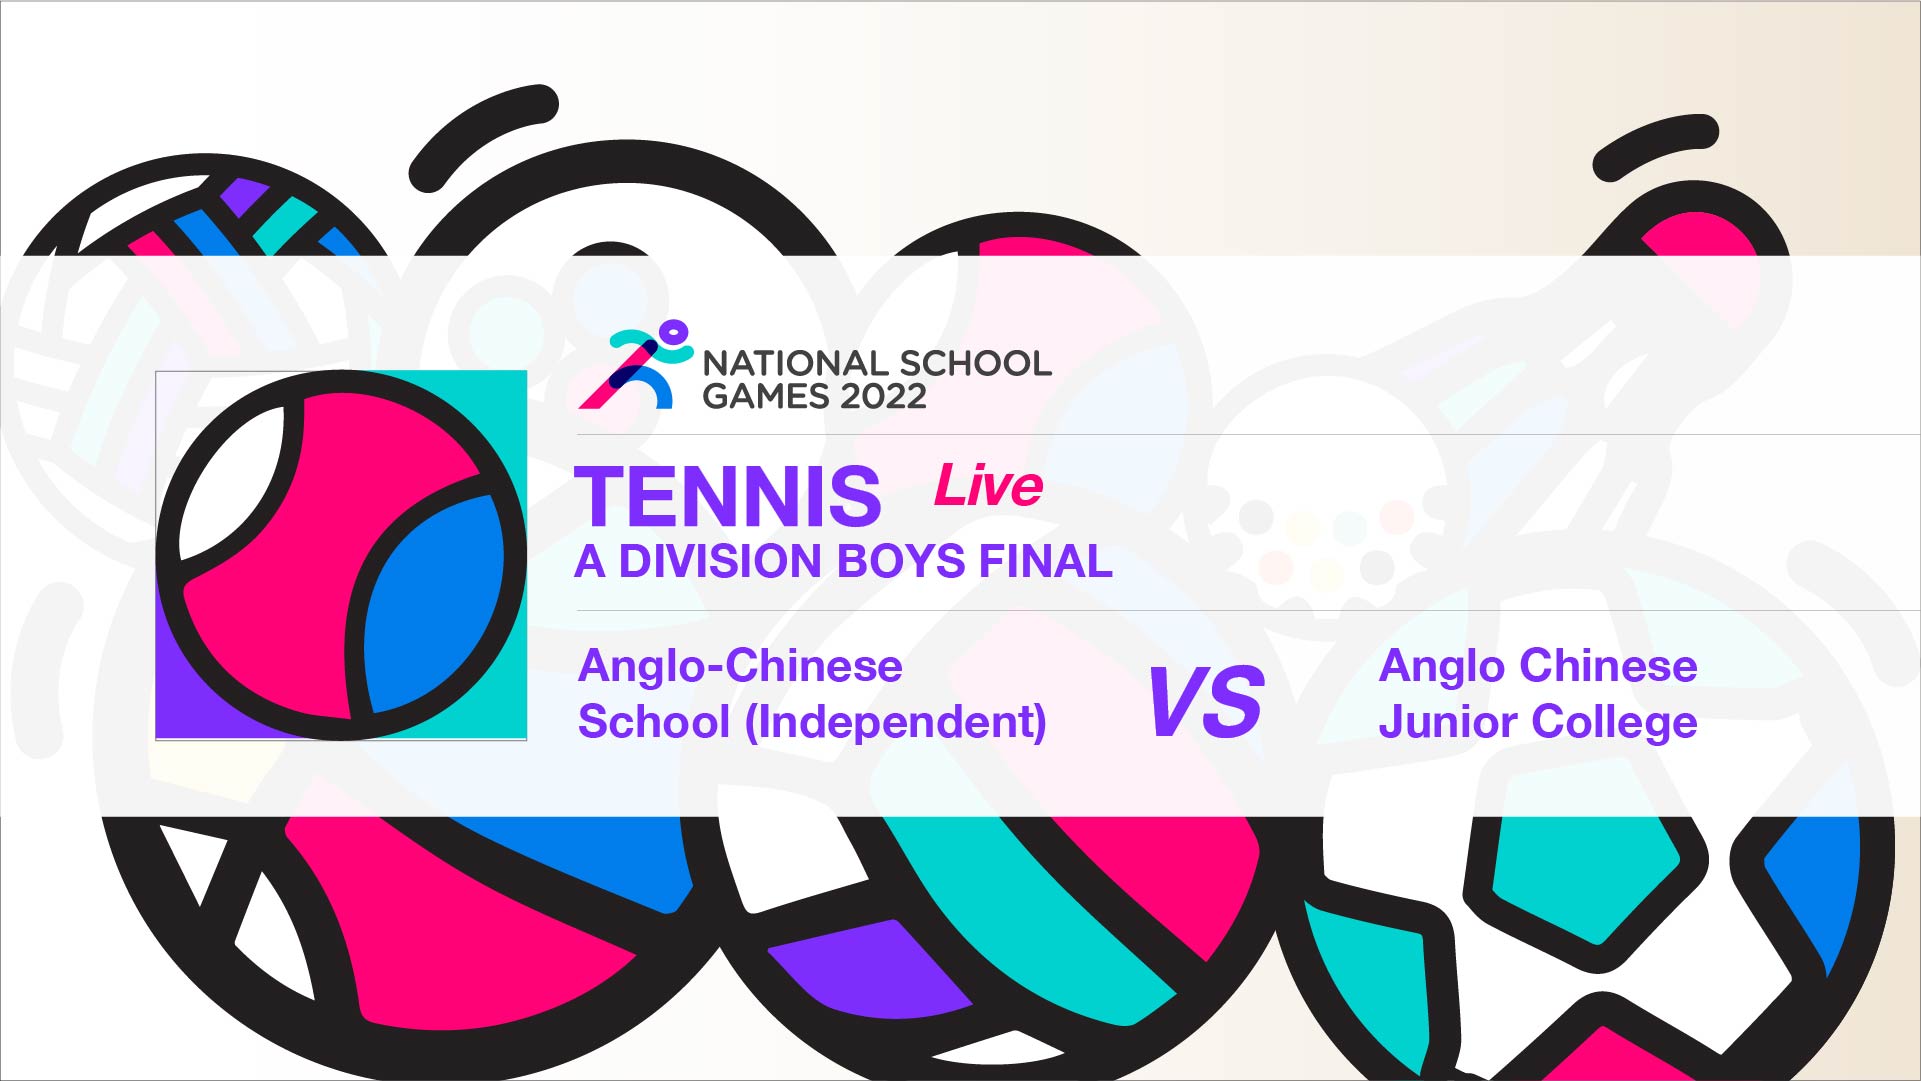 SSSC Tennis National A Division Boys Final | Anglo-Chinese School (Independent) vs Anglo Chinese Junior College